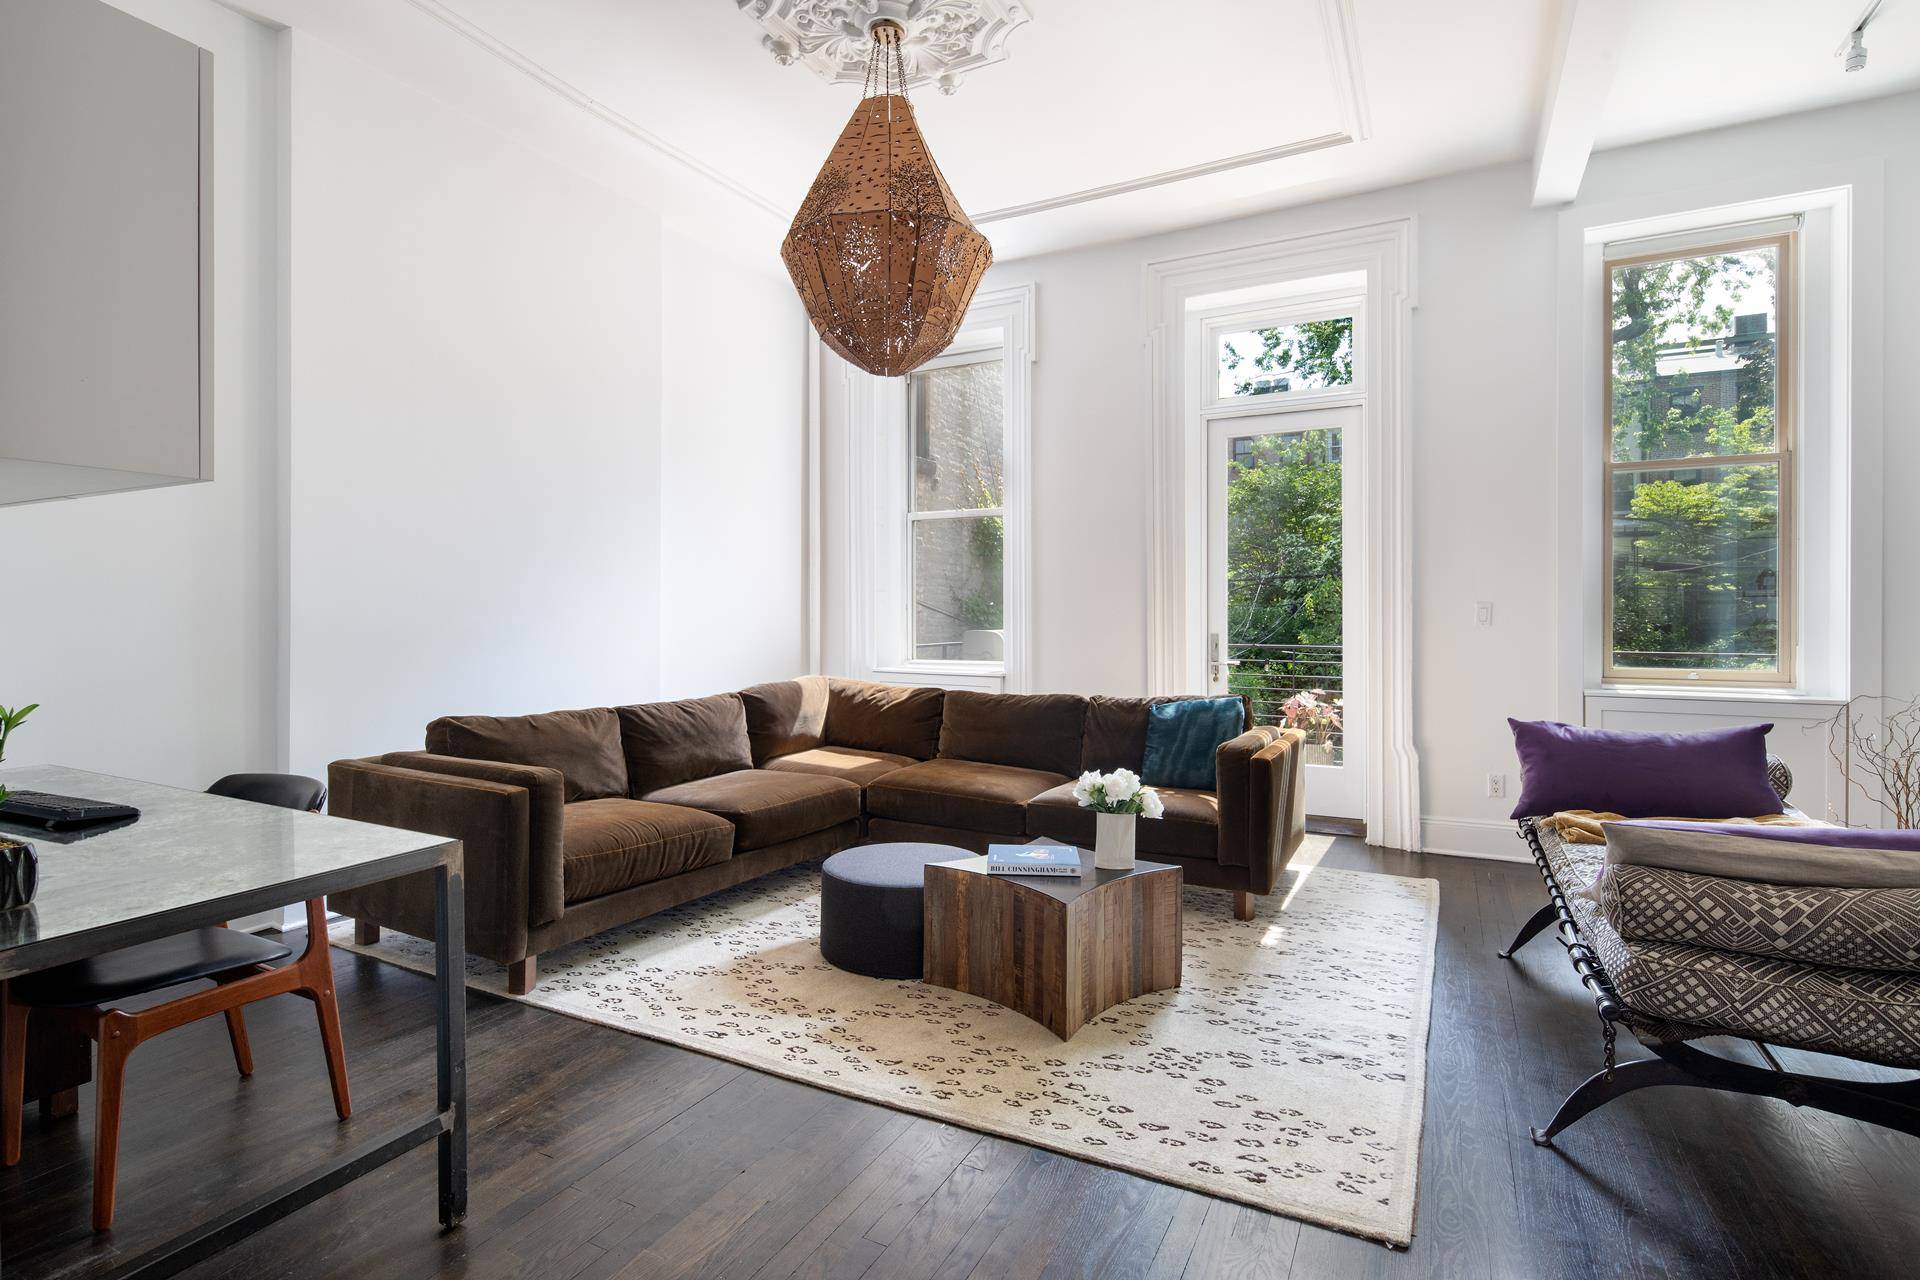 Elegant expansive interiors and copious private outdoor space on two levels make this three bedroom, three bathroom Cobble Hill parlor garden duplex the perfect Brooklyn sanctuary.